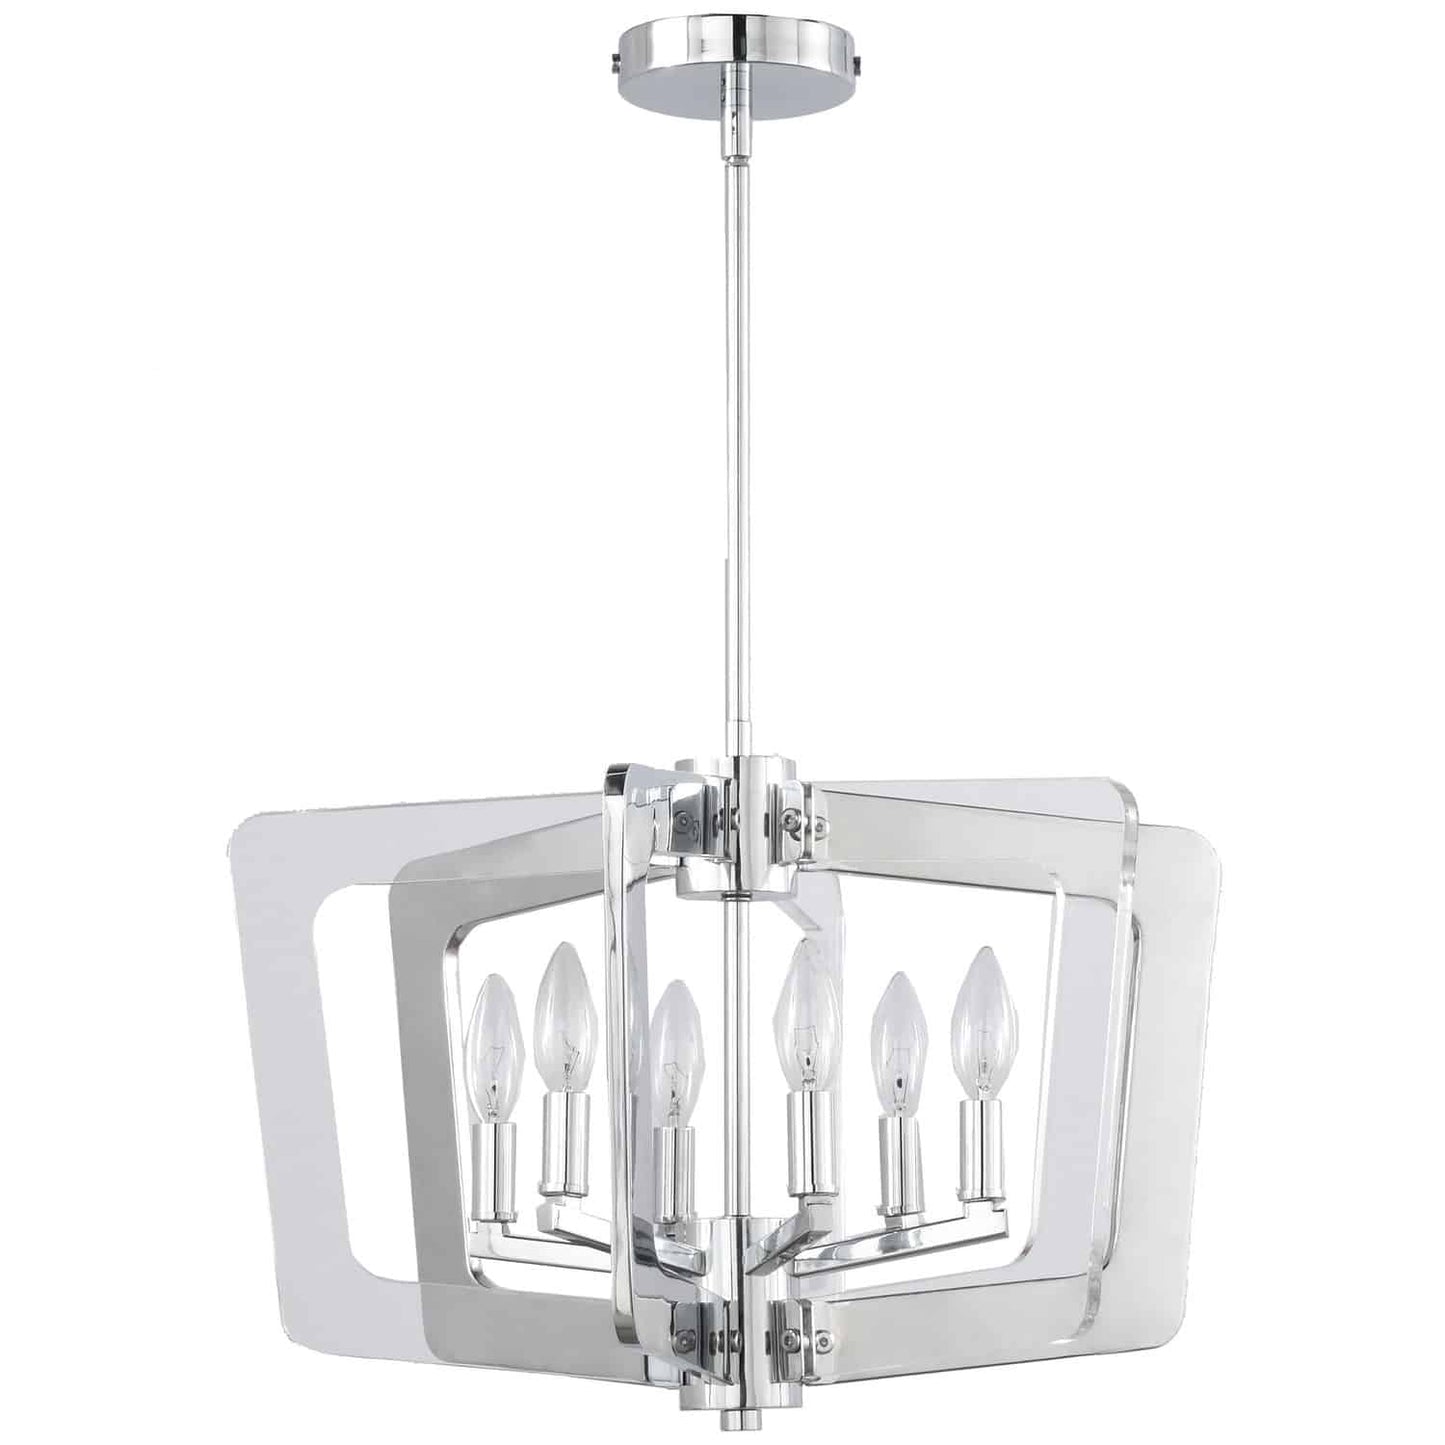 Dainolite SWR-206C-PC 6 Light Chandelier, Polished Chrome Finish with Chrome and Clear Acrylic Arms